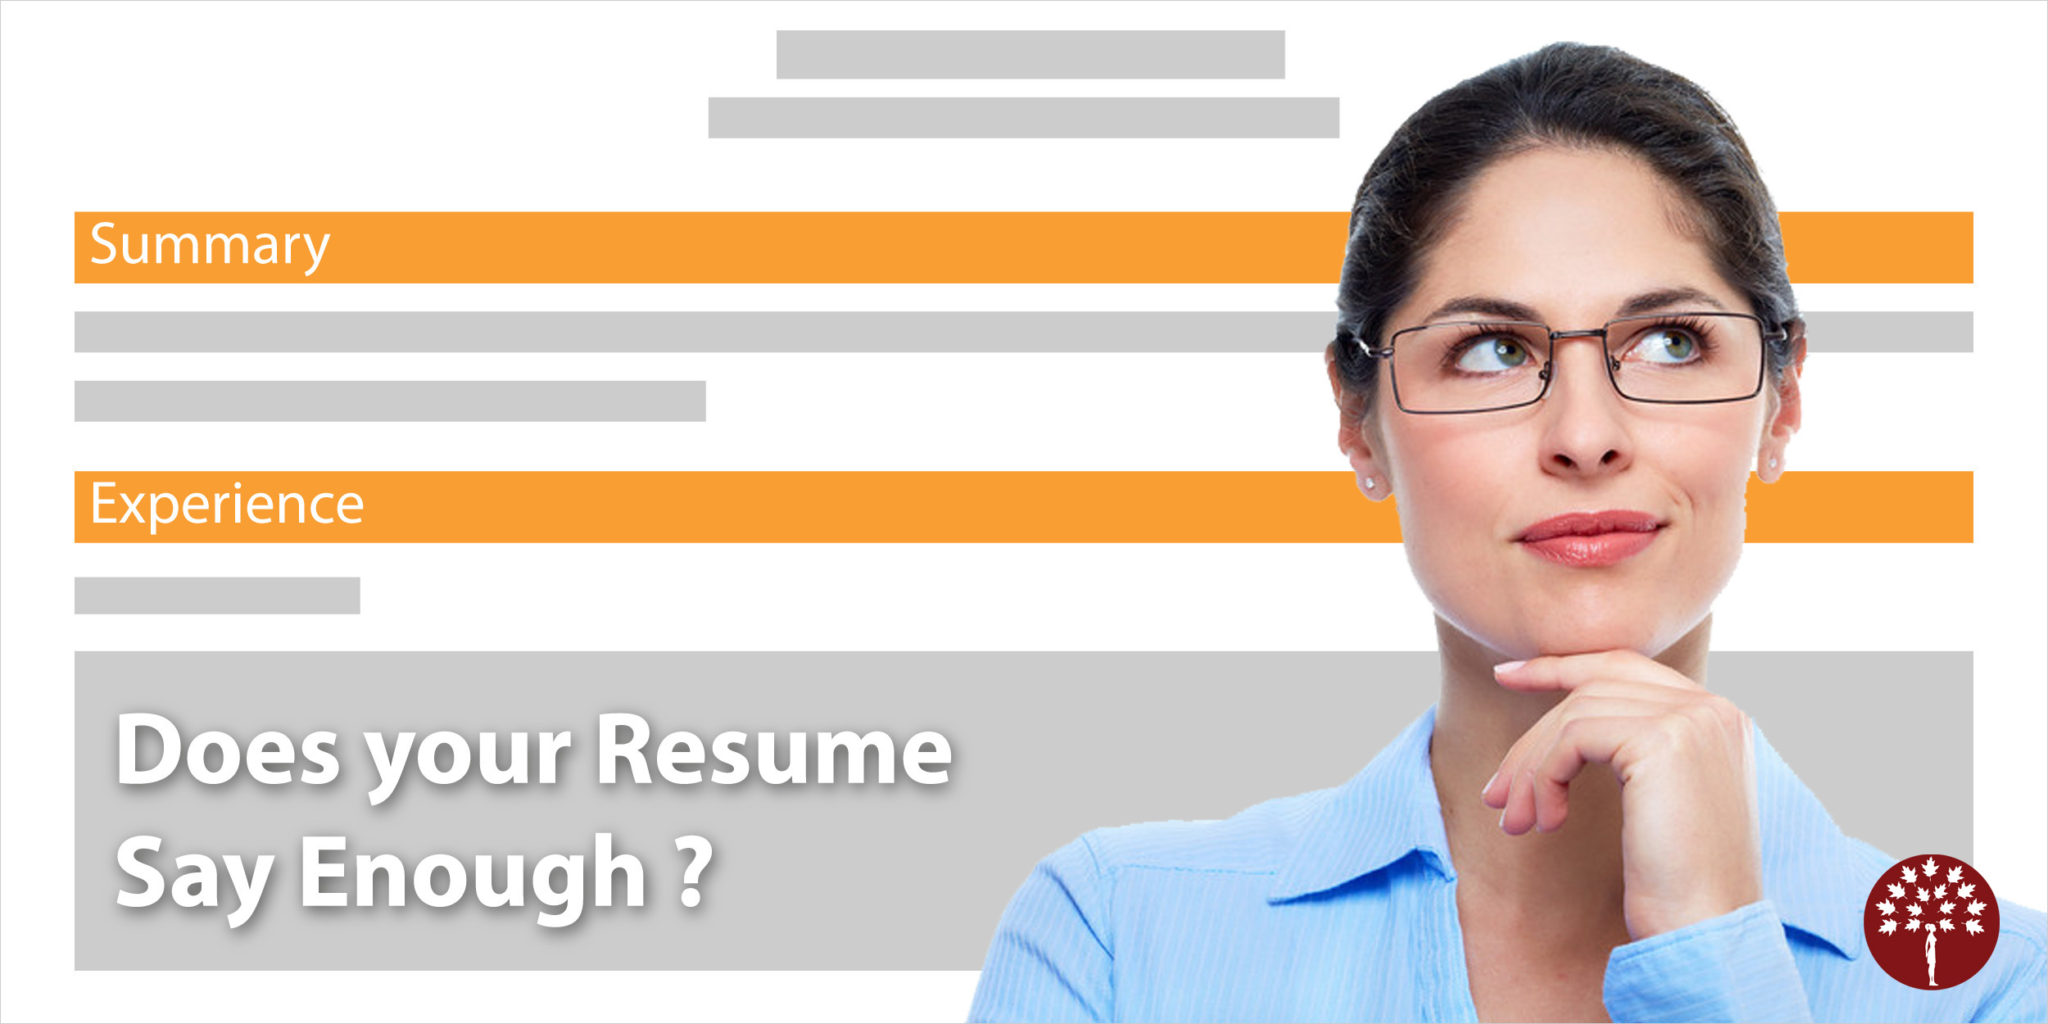 Does your Resume say enough?